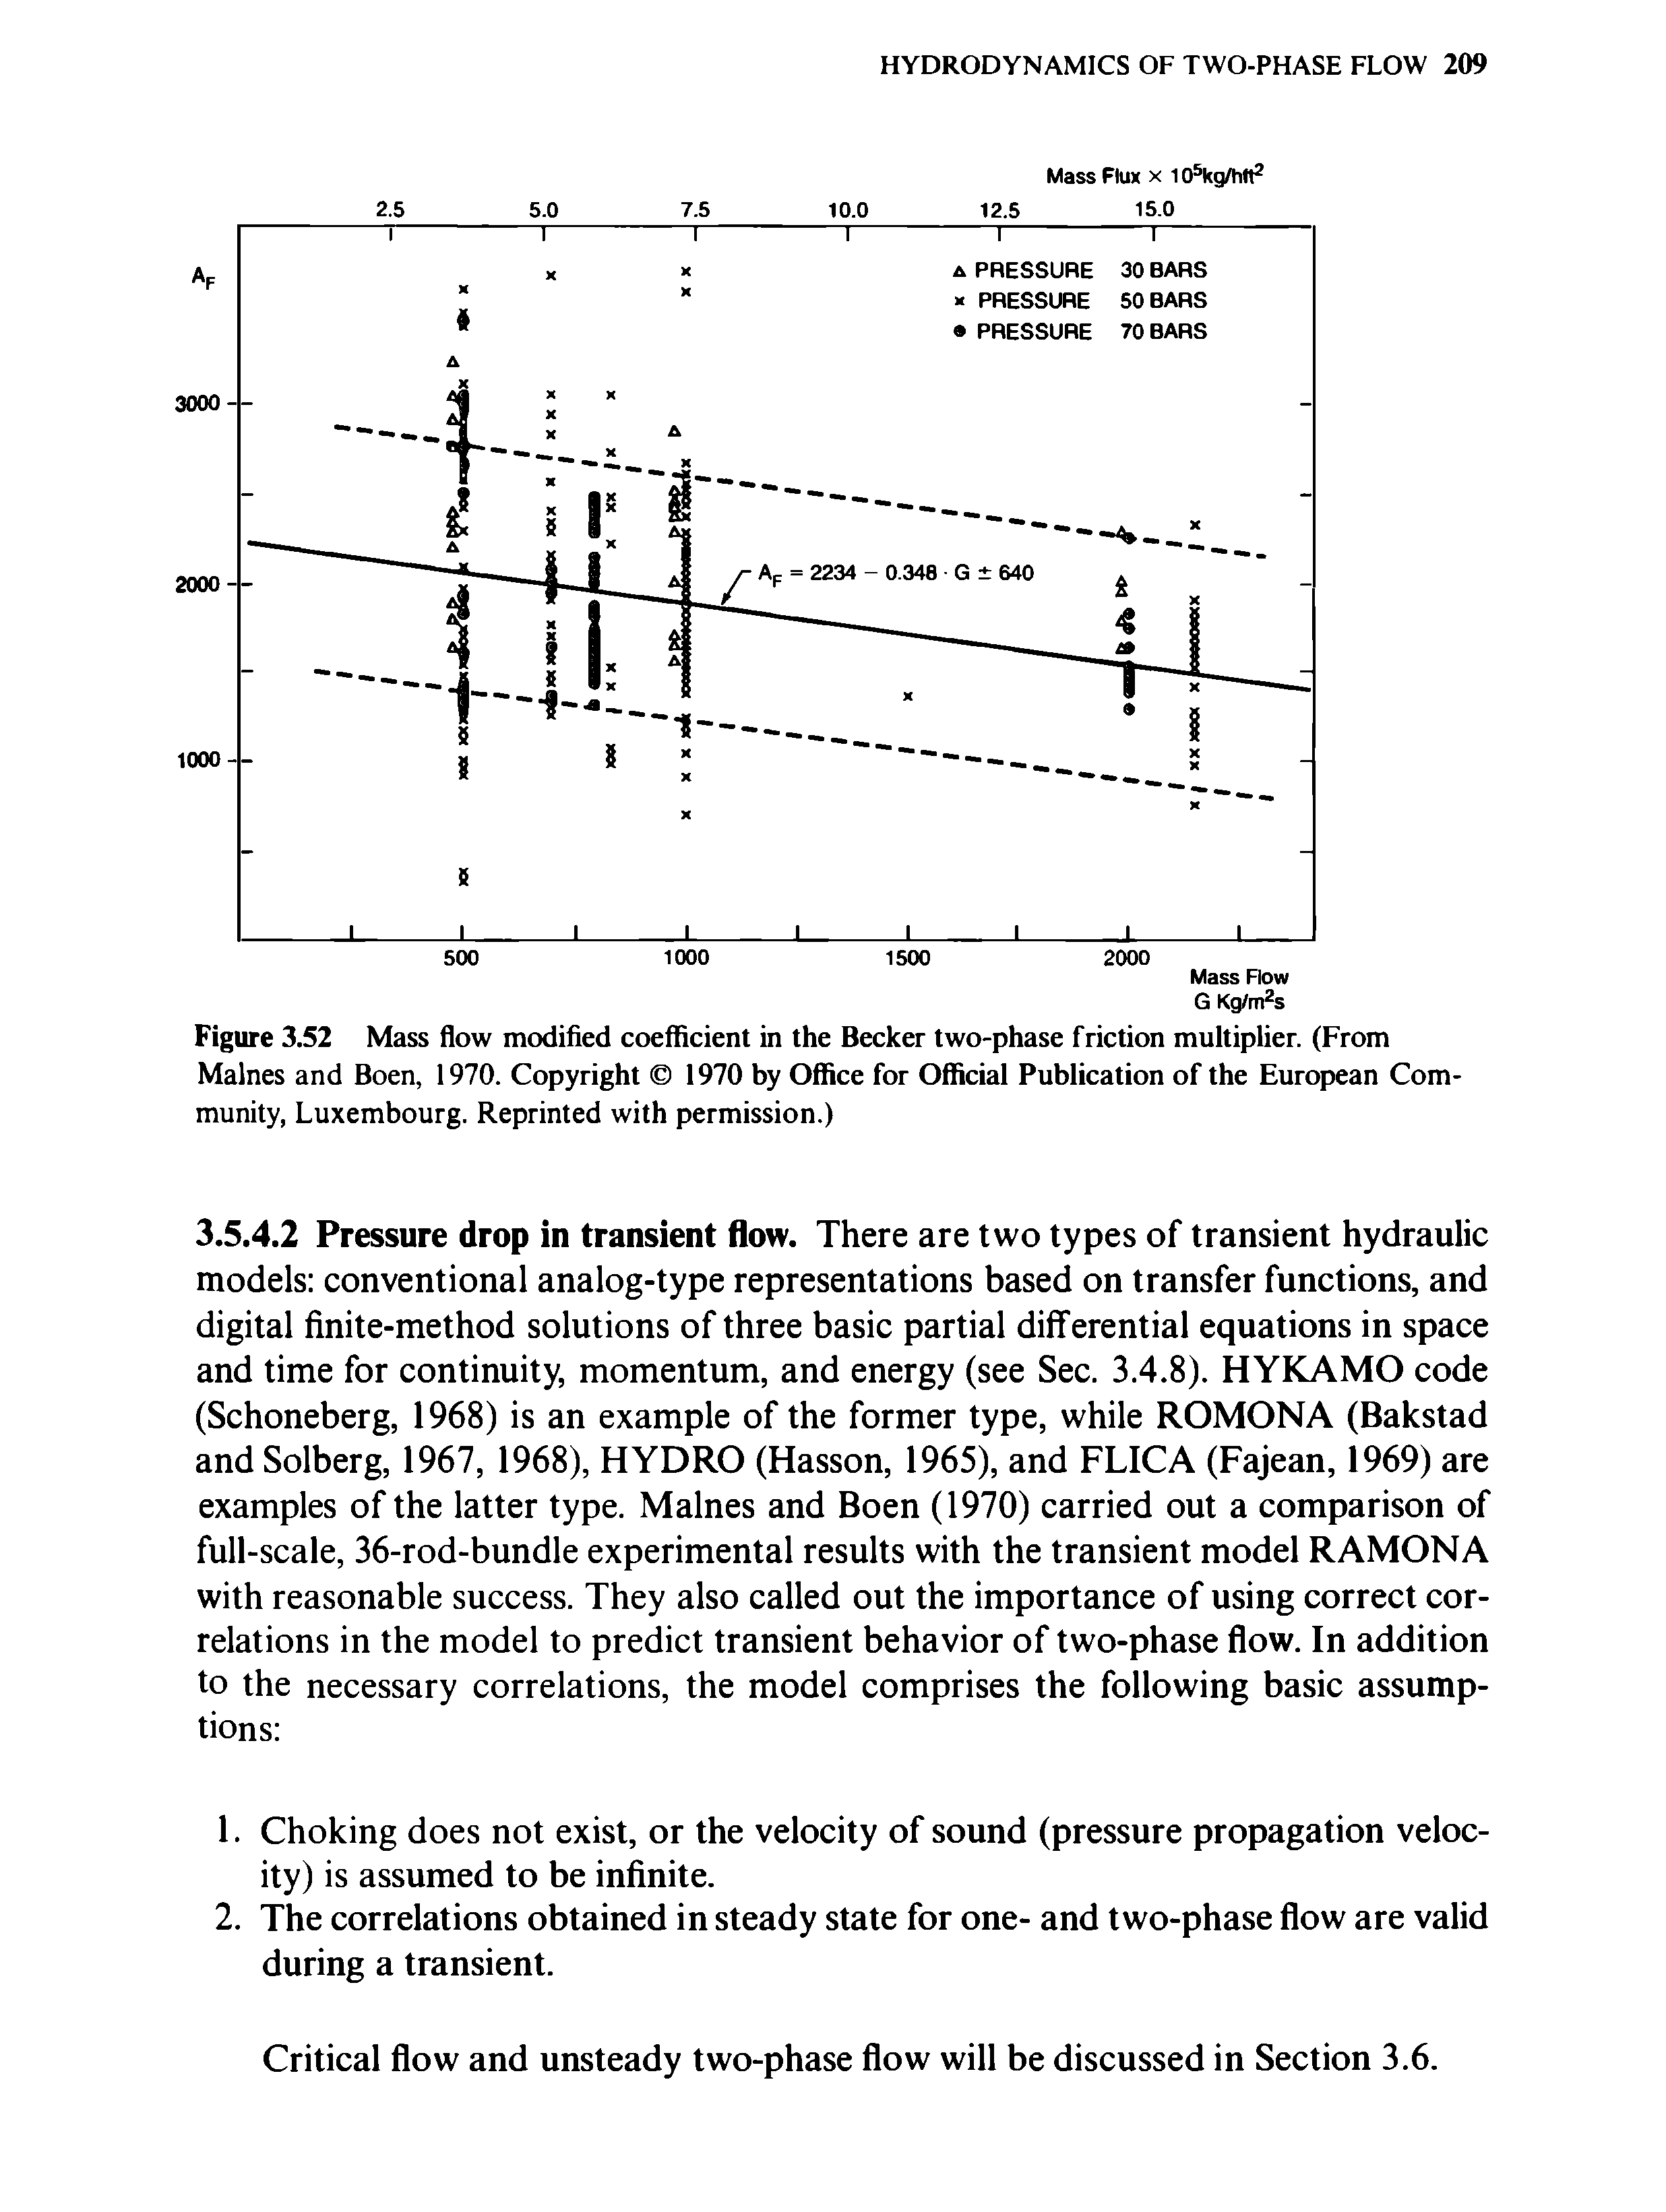 Figure 3.52 Mass flow modified coefficient in the Becker two-phase friction multiplier. (From Malnes and Boen, 1970. Copyright 1970 by Office for Official Publication of the European Community, Luxembourg. Reprinted with permission.)...